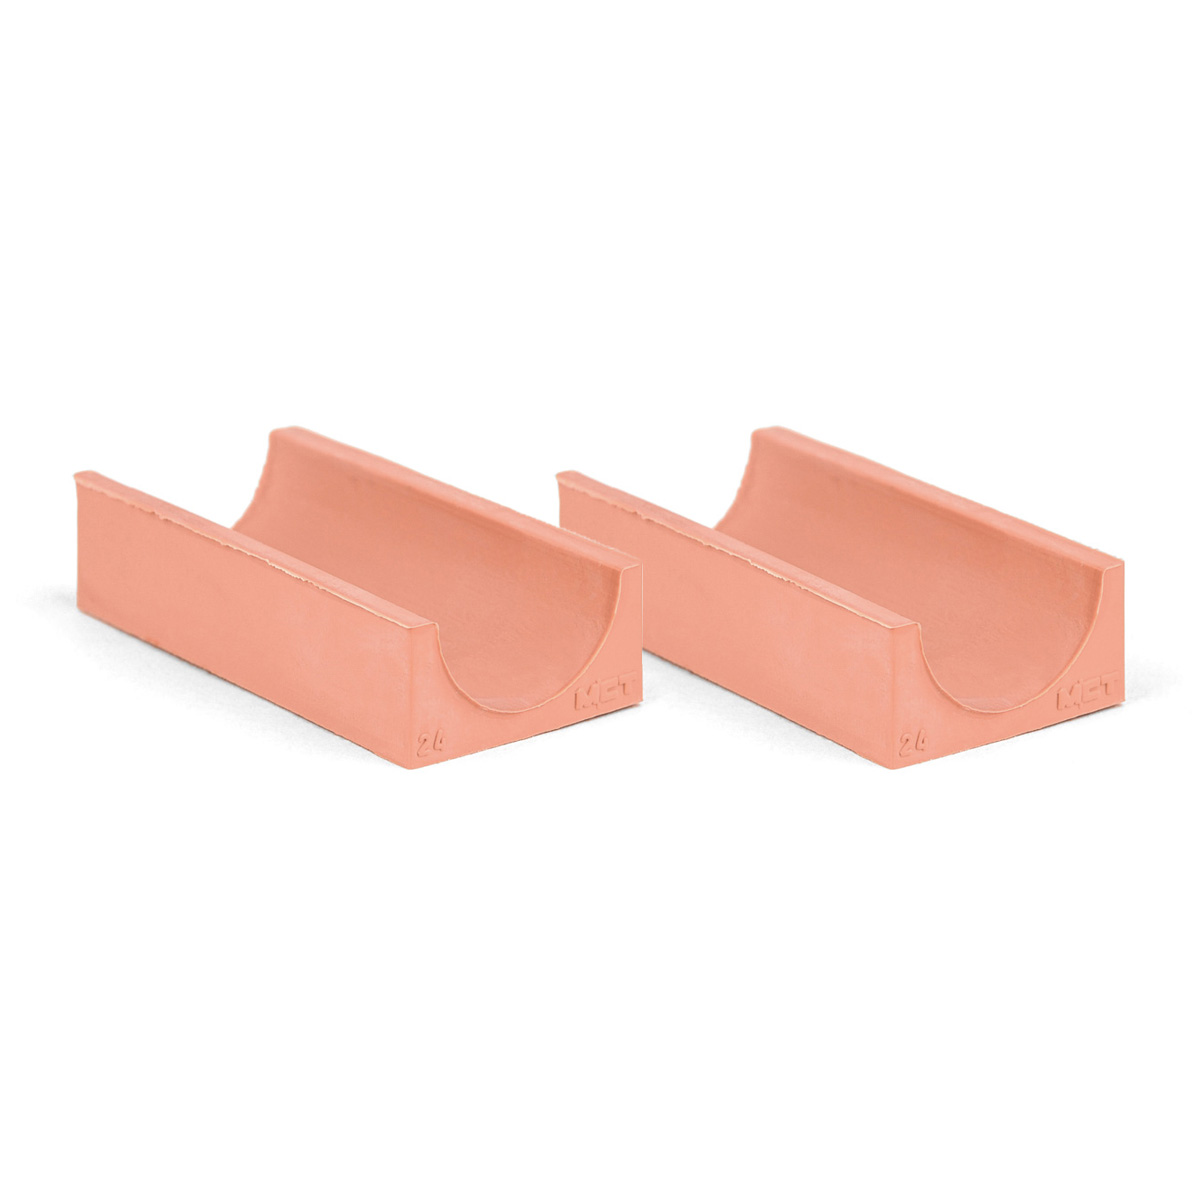 30-24*2 Set of 2 half insert block lycron 30mm, 30-24 for cable/pipe diam. 23.5-24.5mm